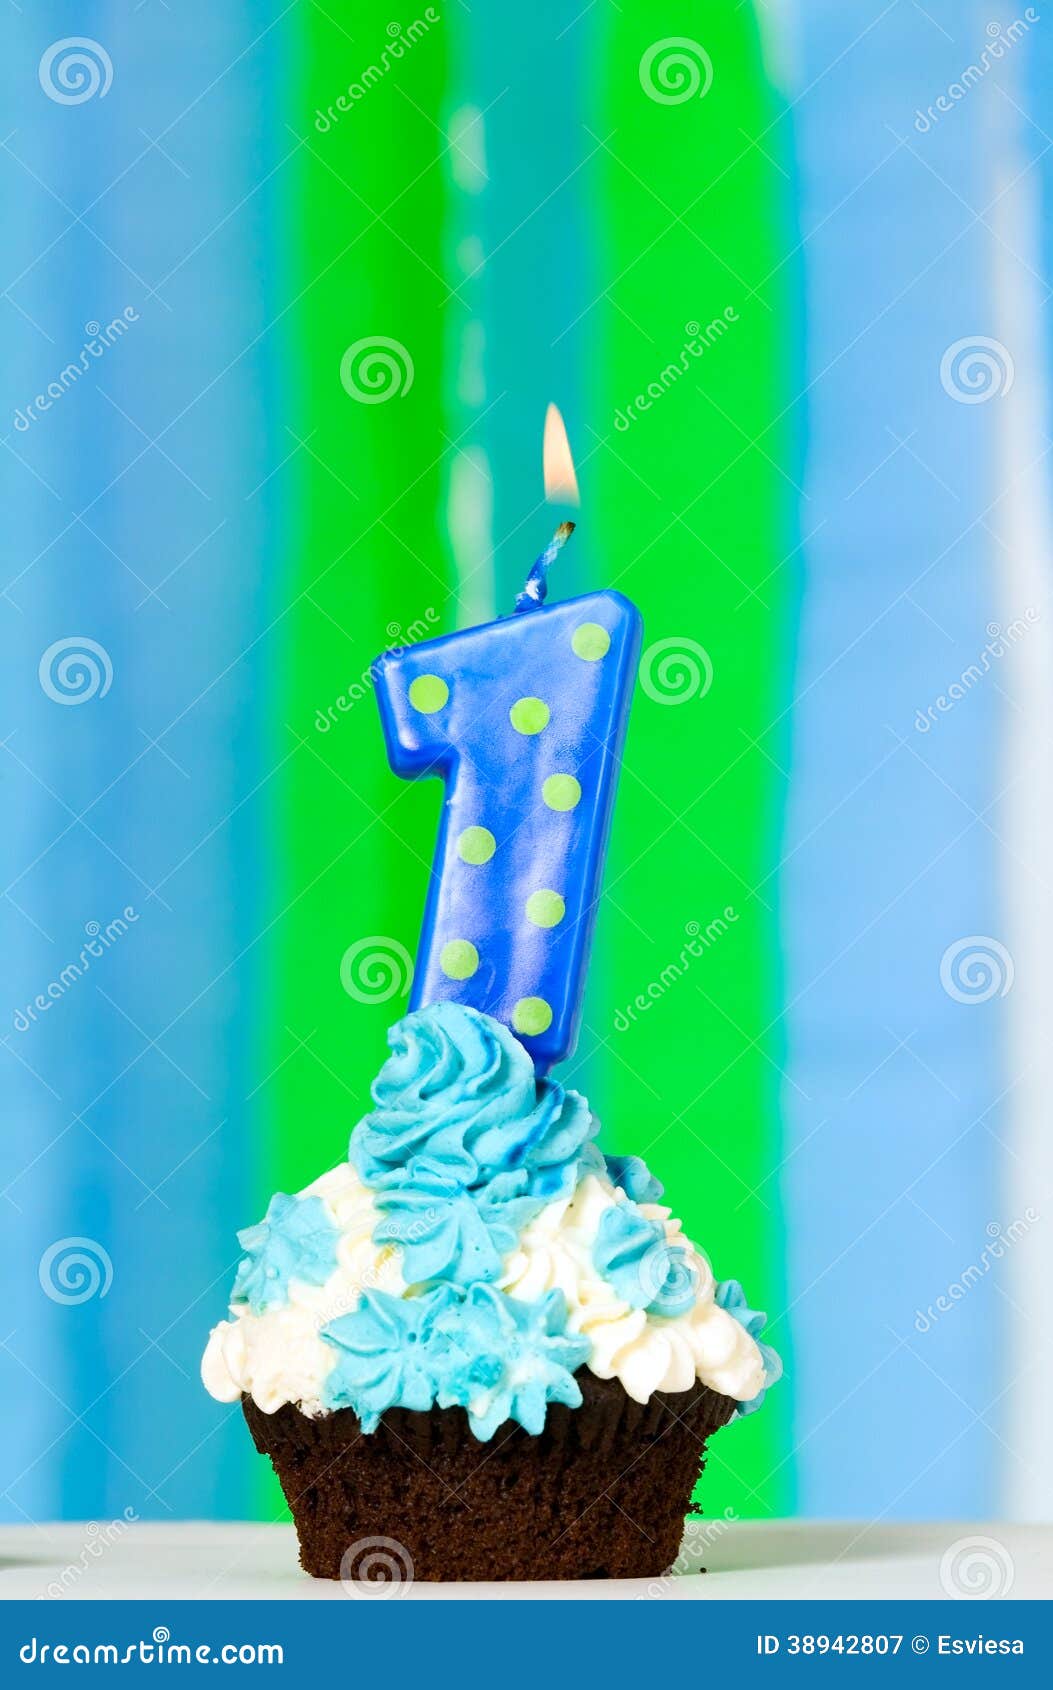 The First Birthday Cake with Candle Stock Image - Image of home, candy ...